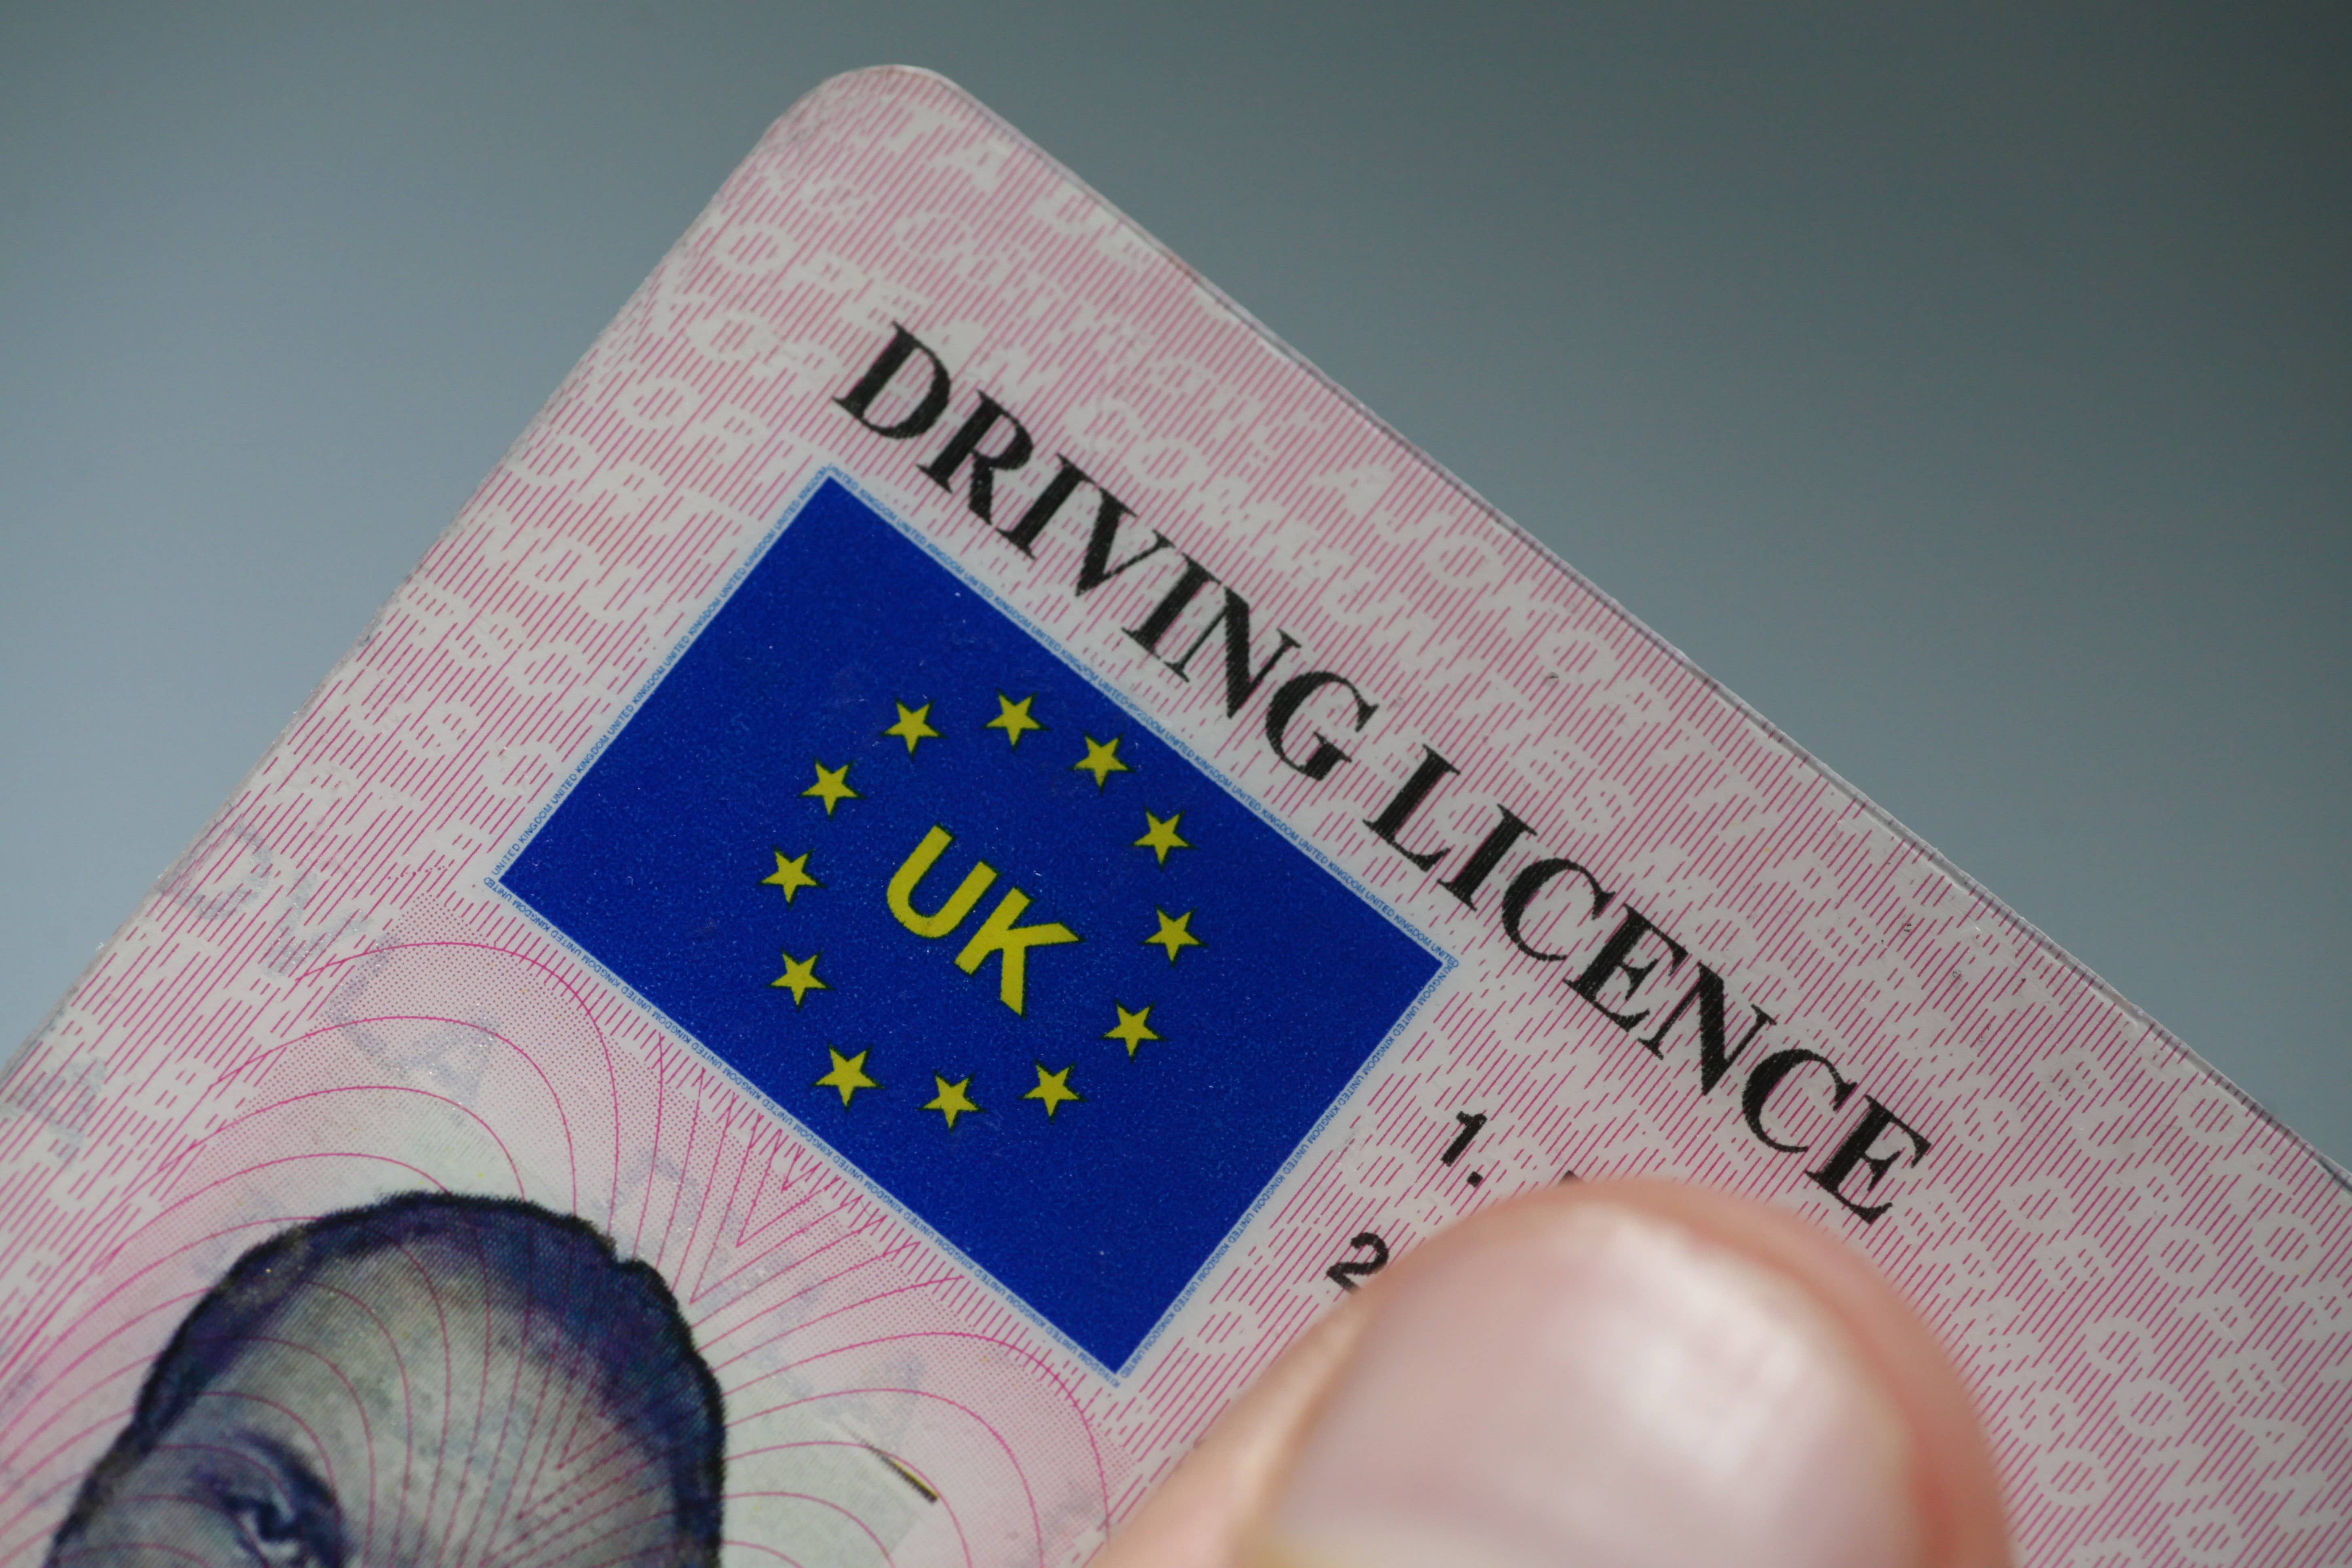 Martin Lewis Urges Motorists To Check Driving Licences To Avoid £1000 Fine